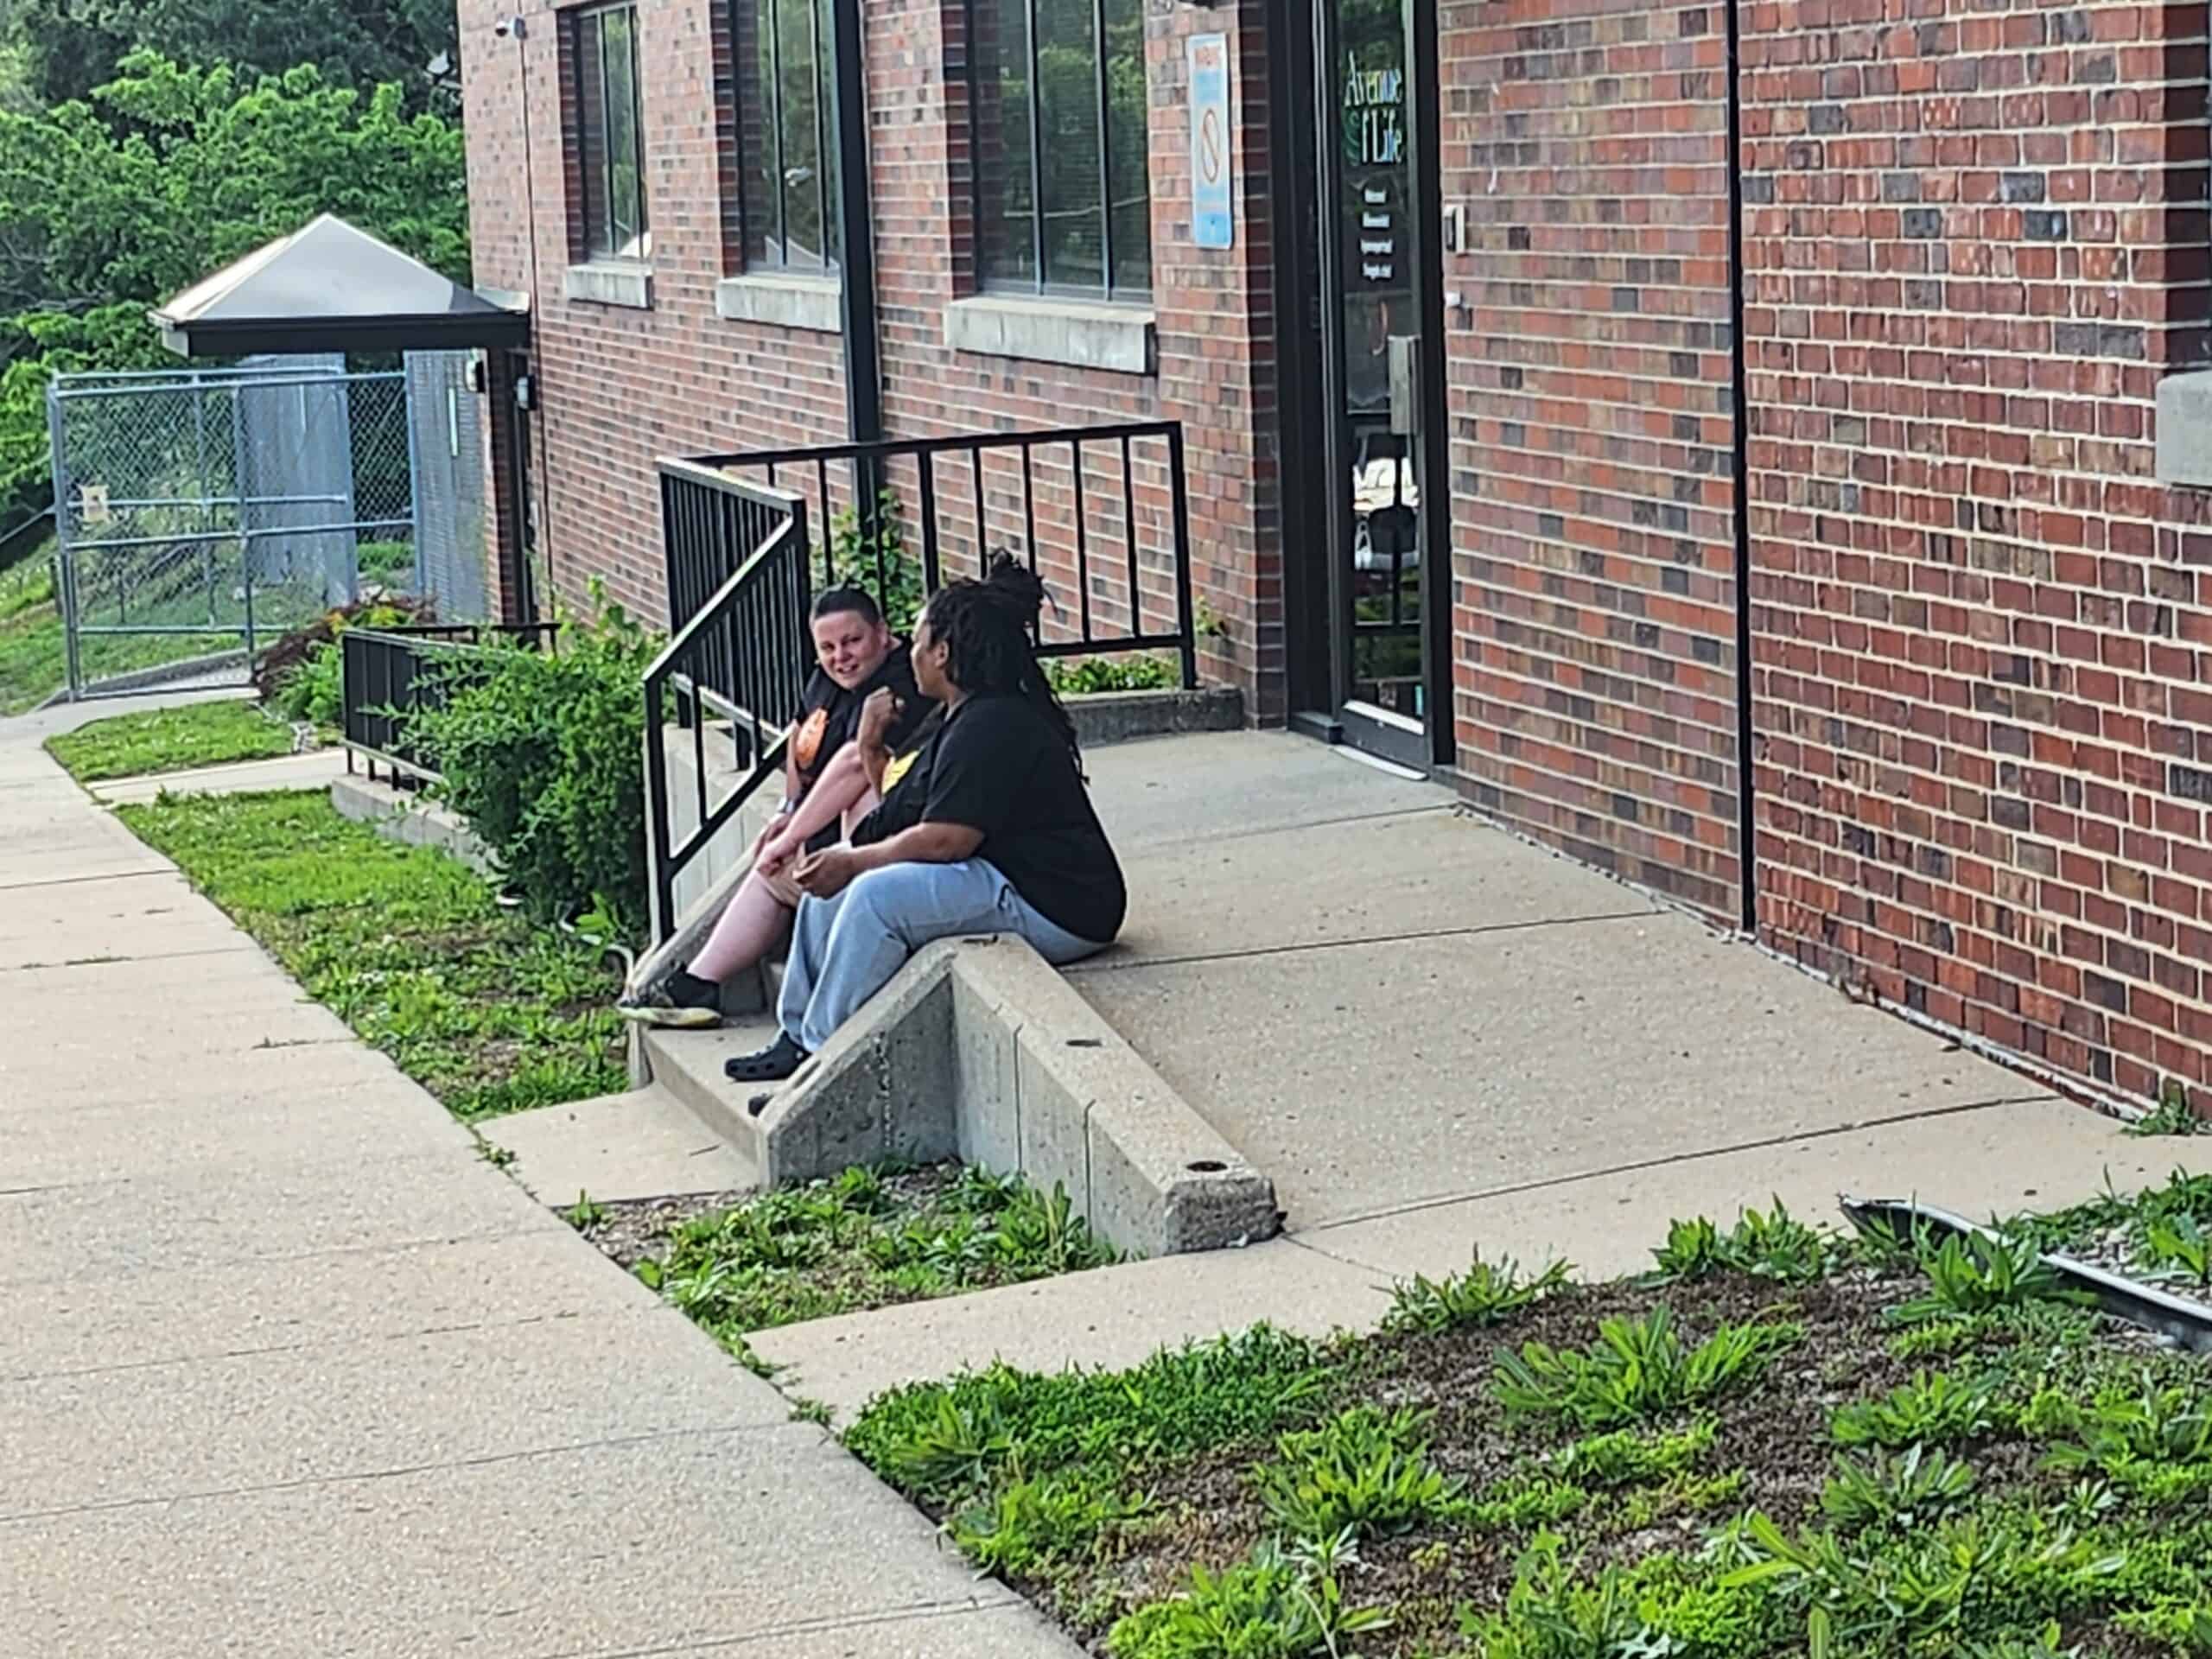 Two people sit outside on stairs outside a brick building, talking to each other.